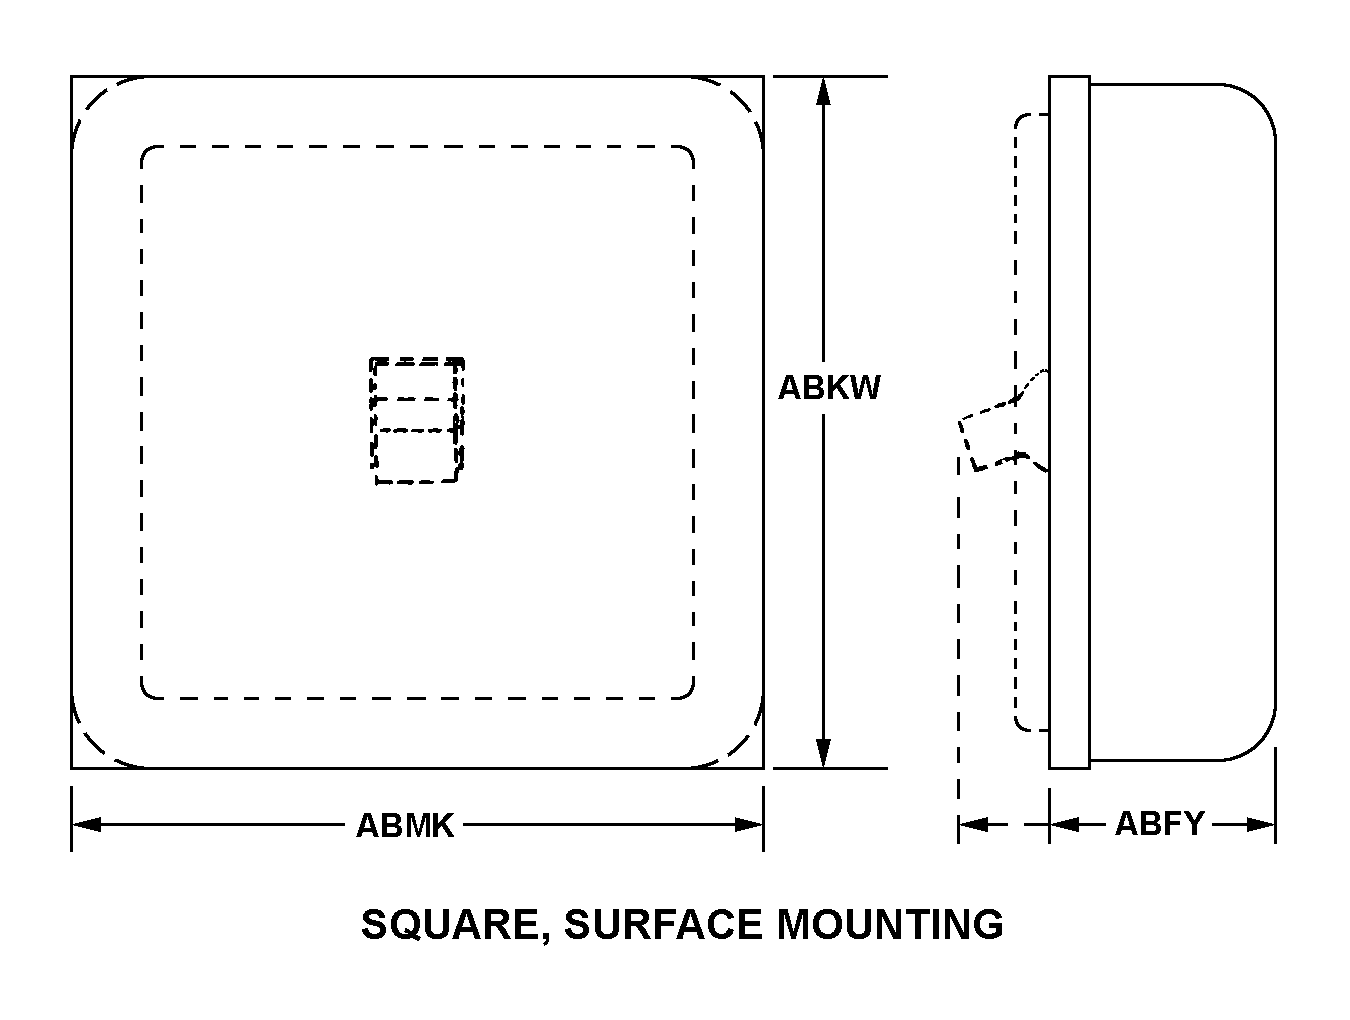 SQUARE, SURFACE MOUNTING style nsn 5940-01-517-9366